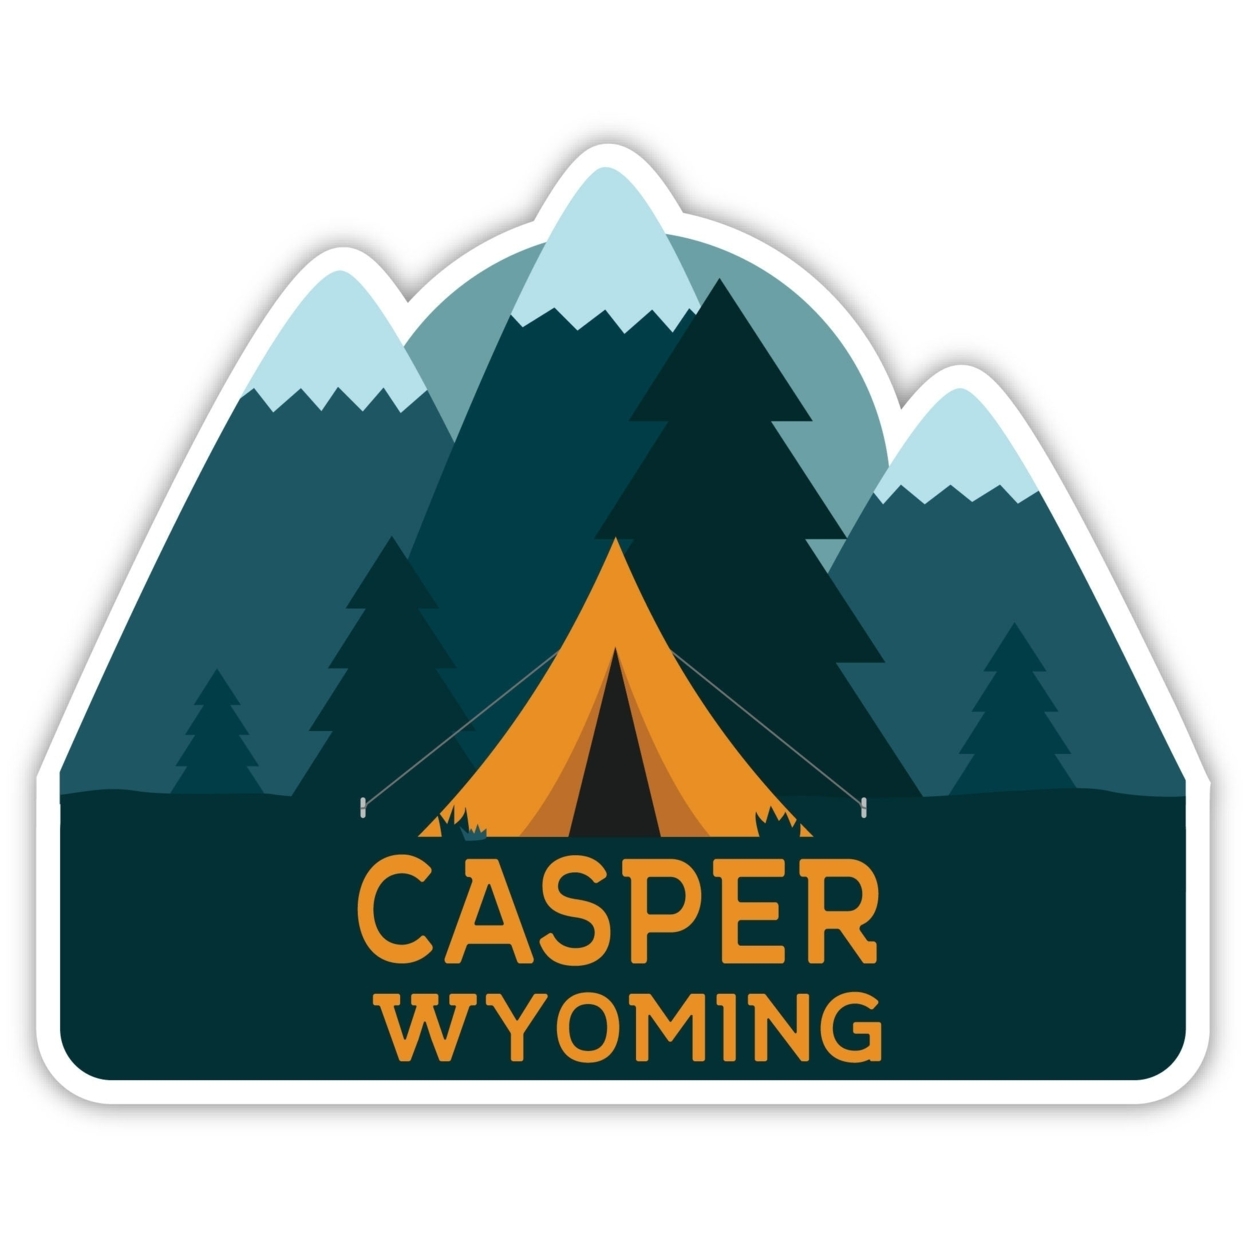 Casper Wyoming Souvenir Decorative Stickers (Choose Theme And Size) - 4-Pack, 4-Inch, Tent